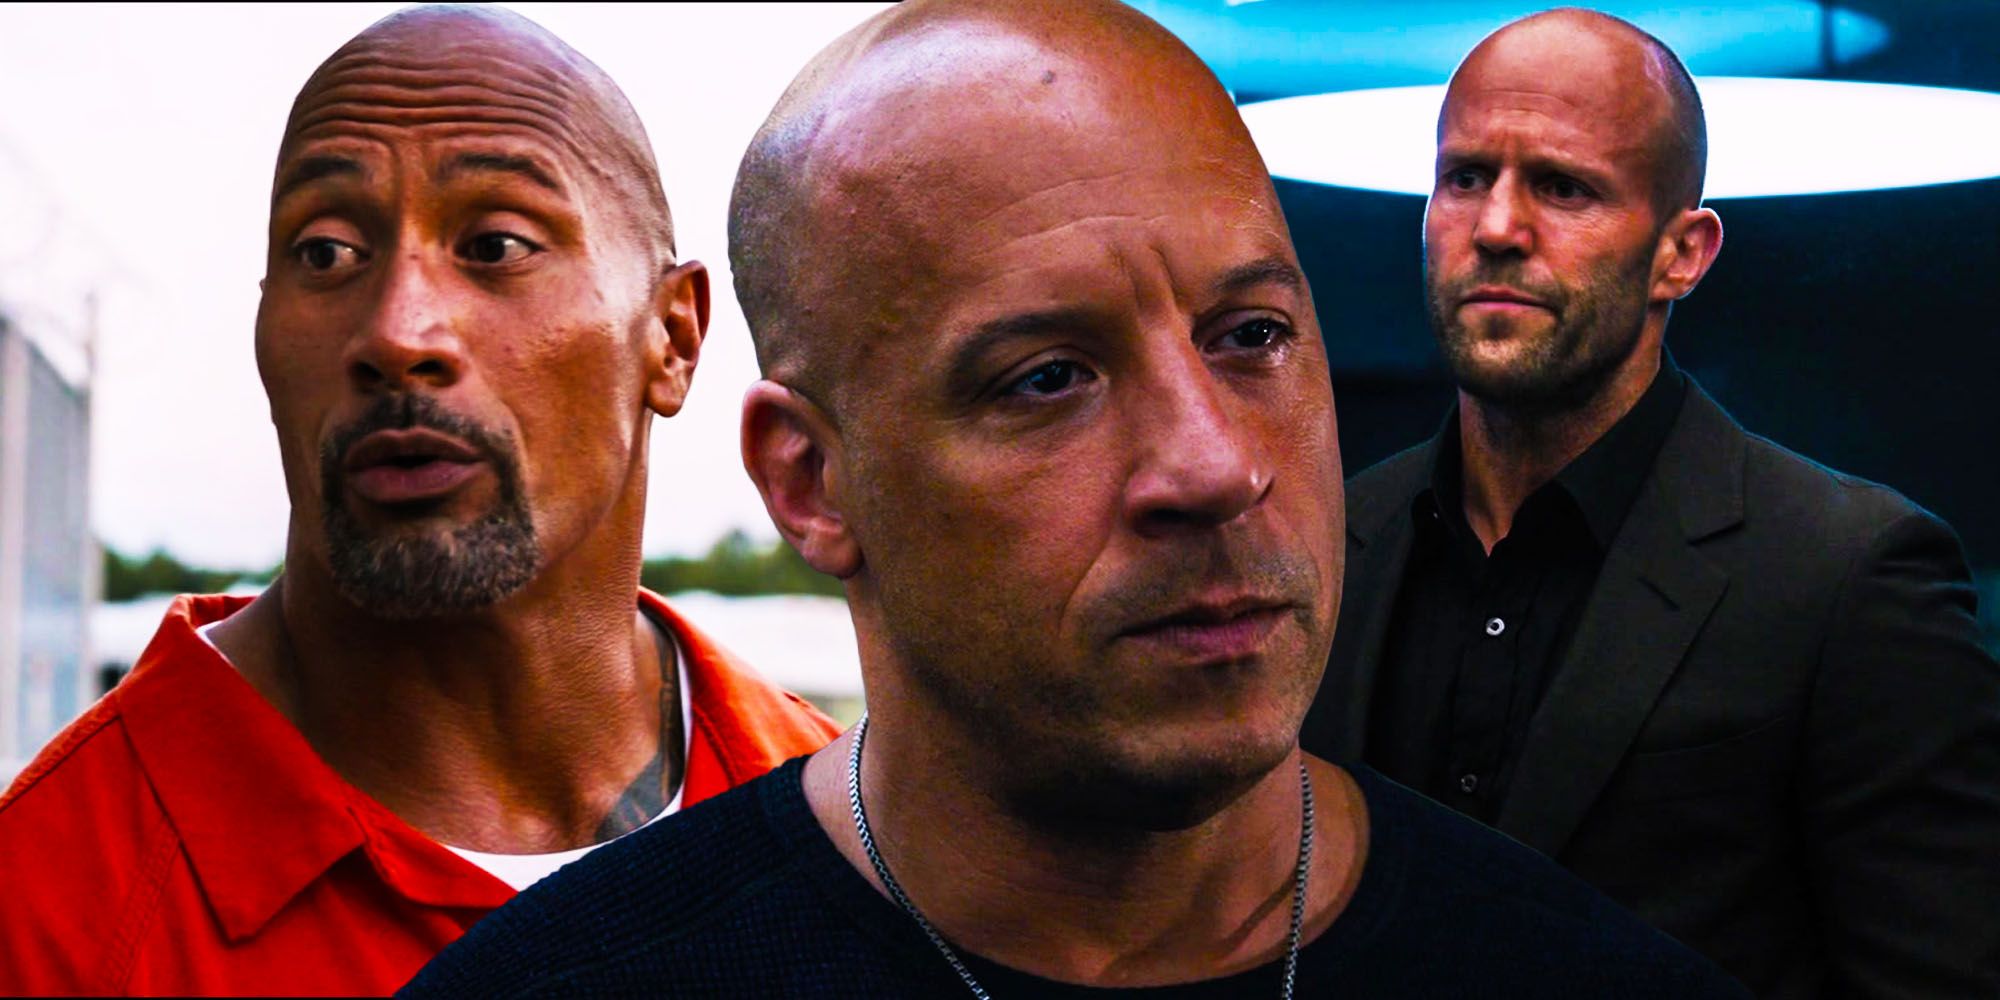 The Fast & Furious Casts Refusal To Lose A Fight Is Becoming A Problem